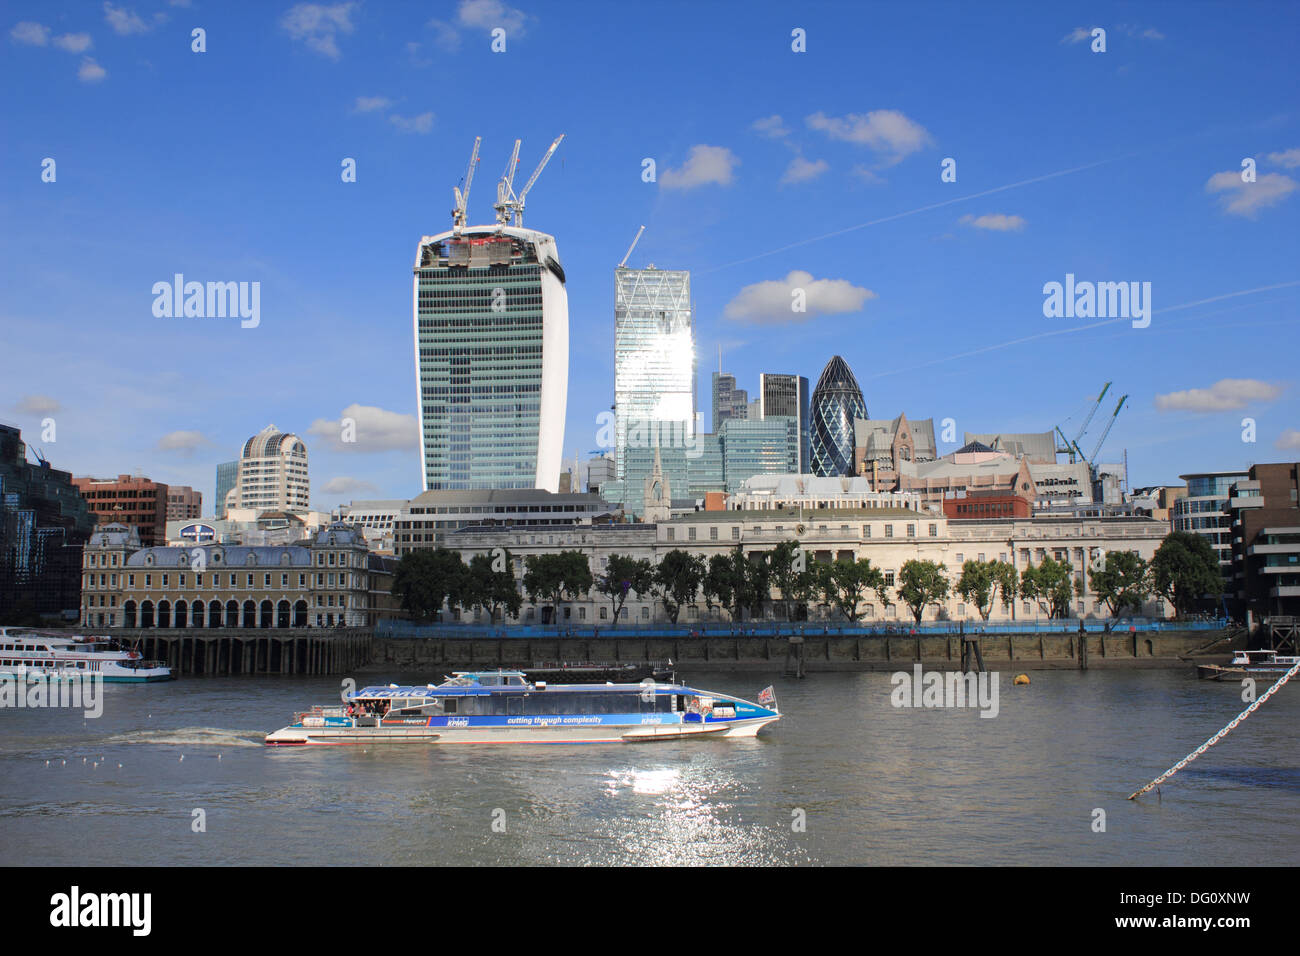 The Walkie-Talkie and Cheese Grater modern buildings on the City skyline London, England, UK. Stock Photo